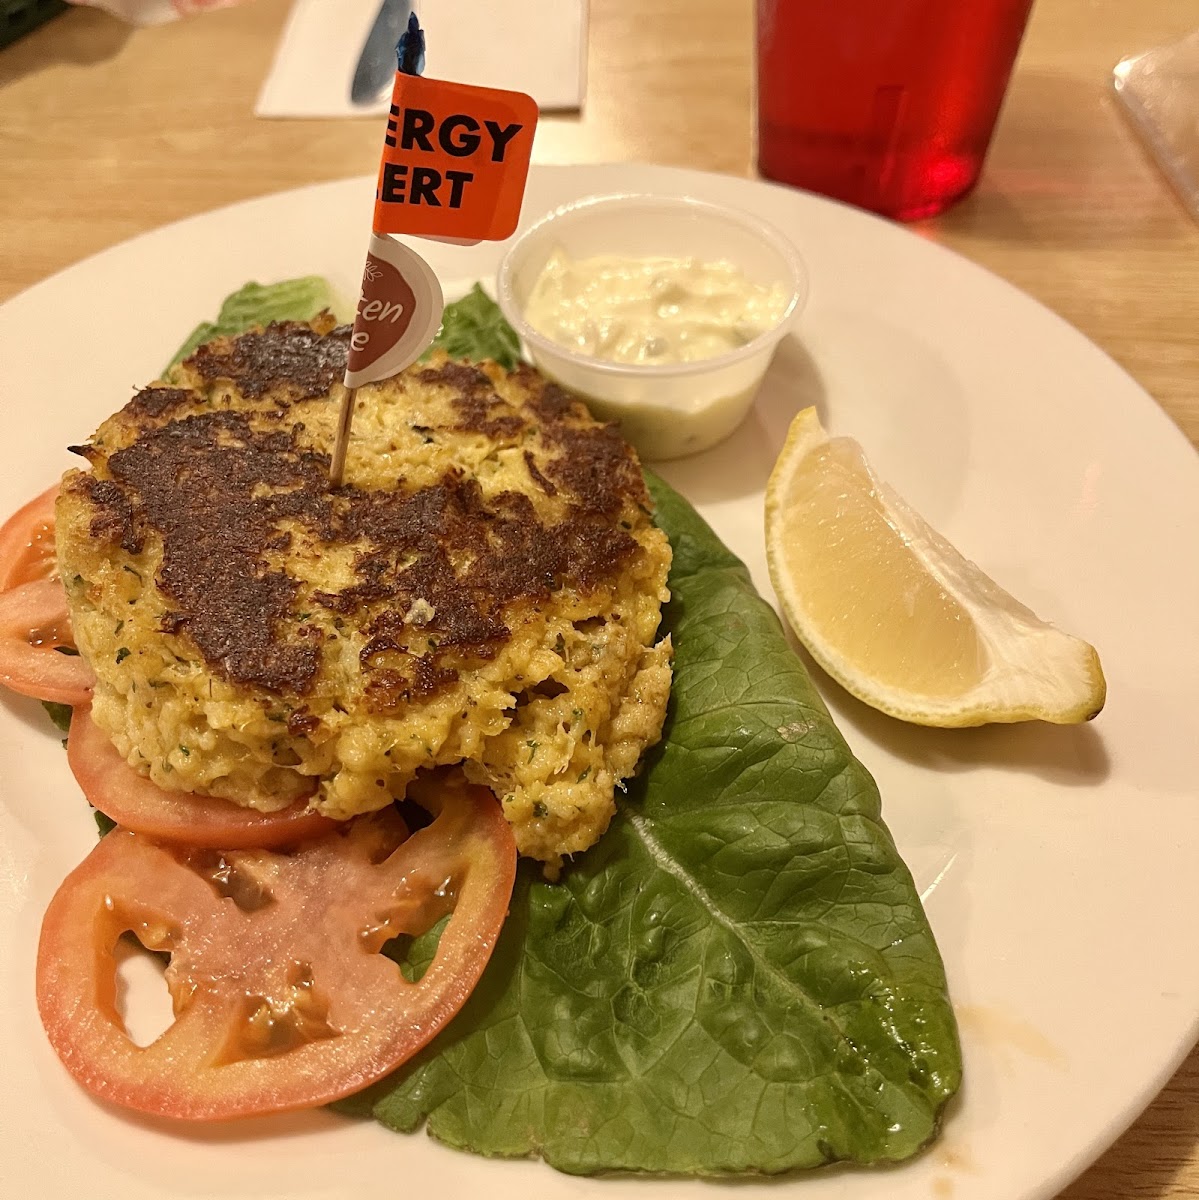 Crabless crabcake